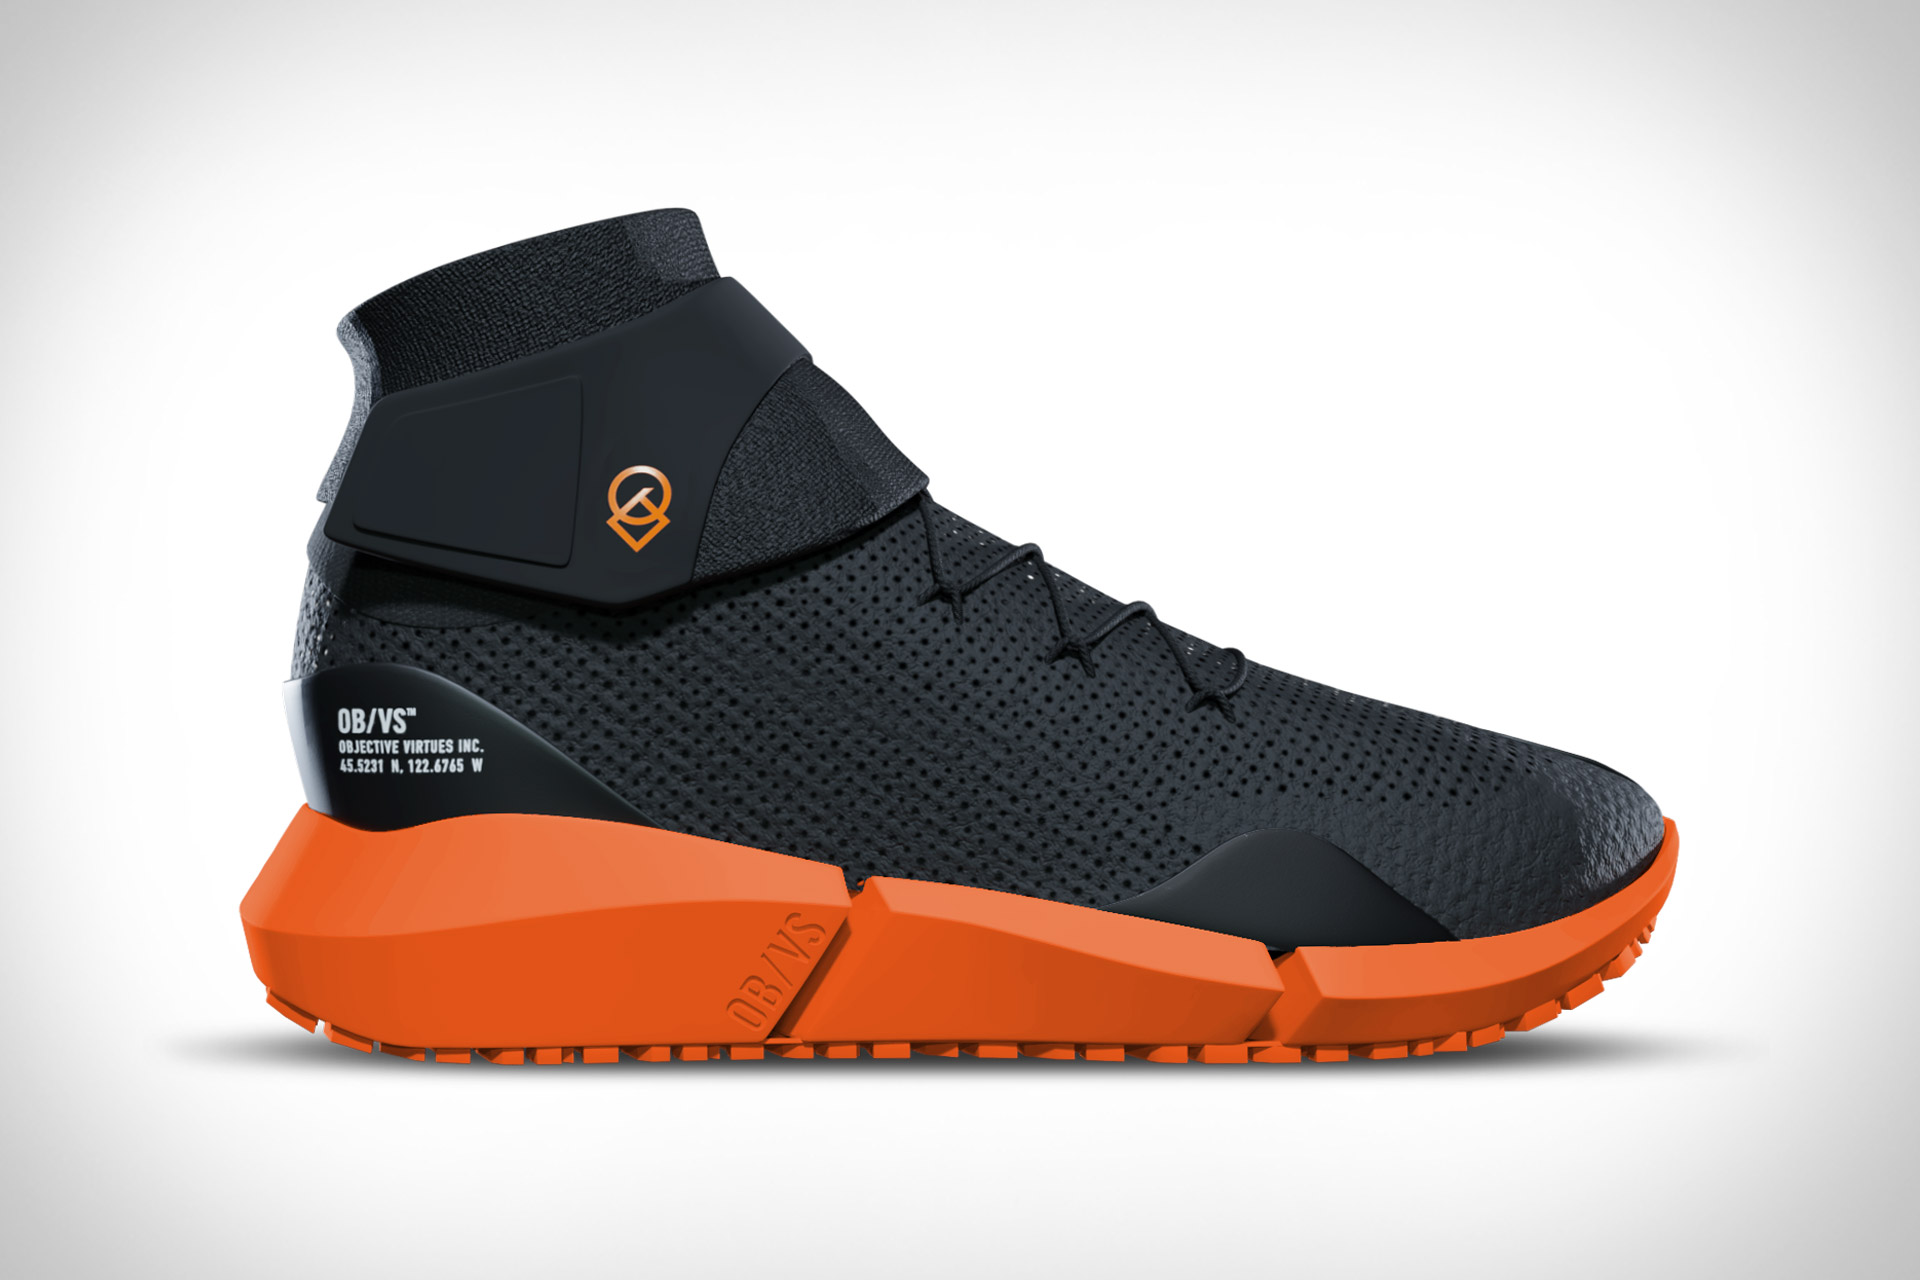 OBVS/ADPT™: The World's First Climate Adaptable Sneaker